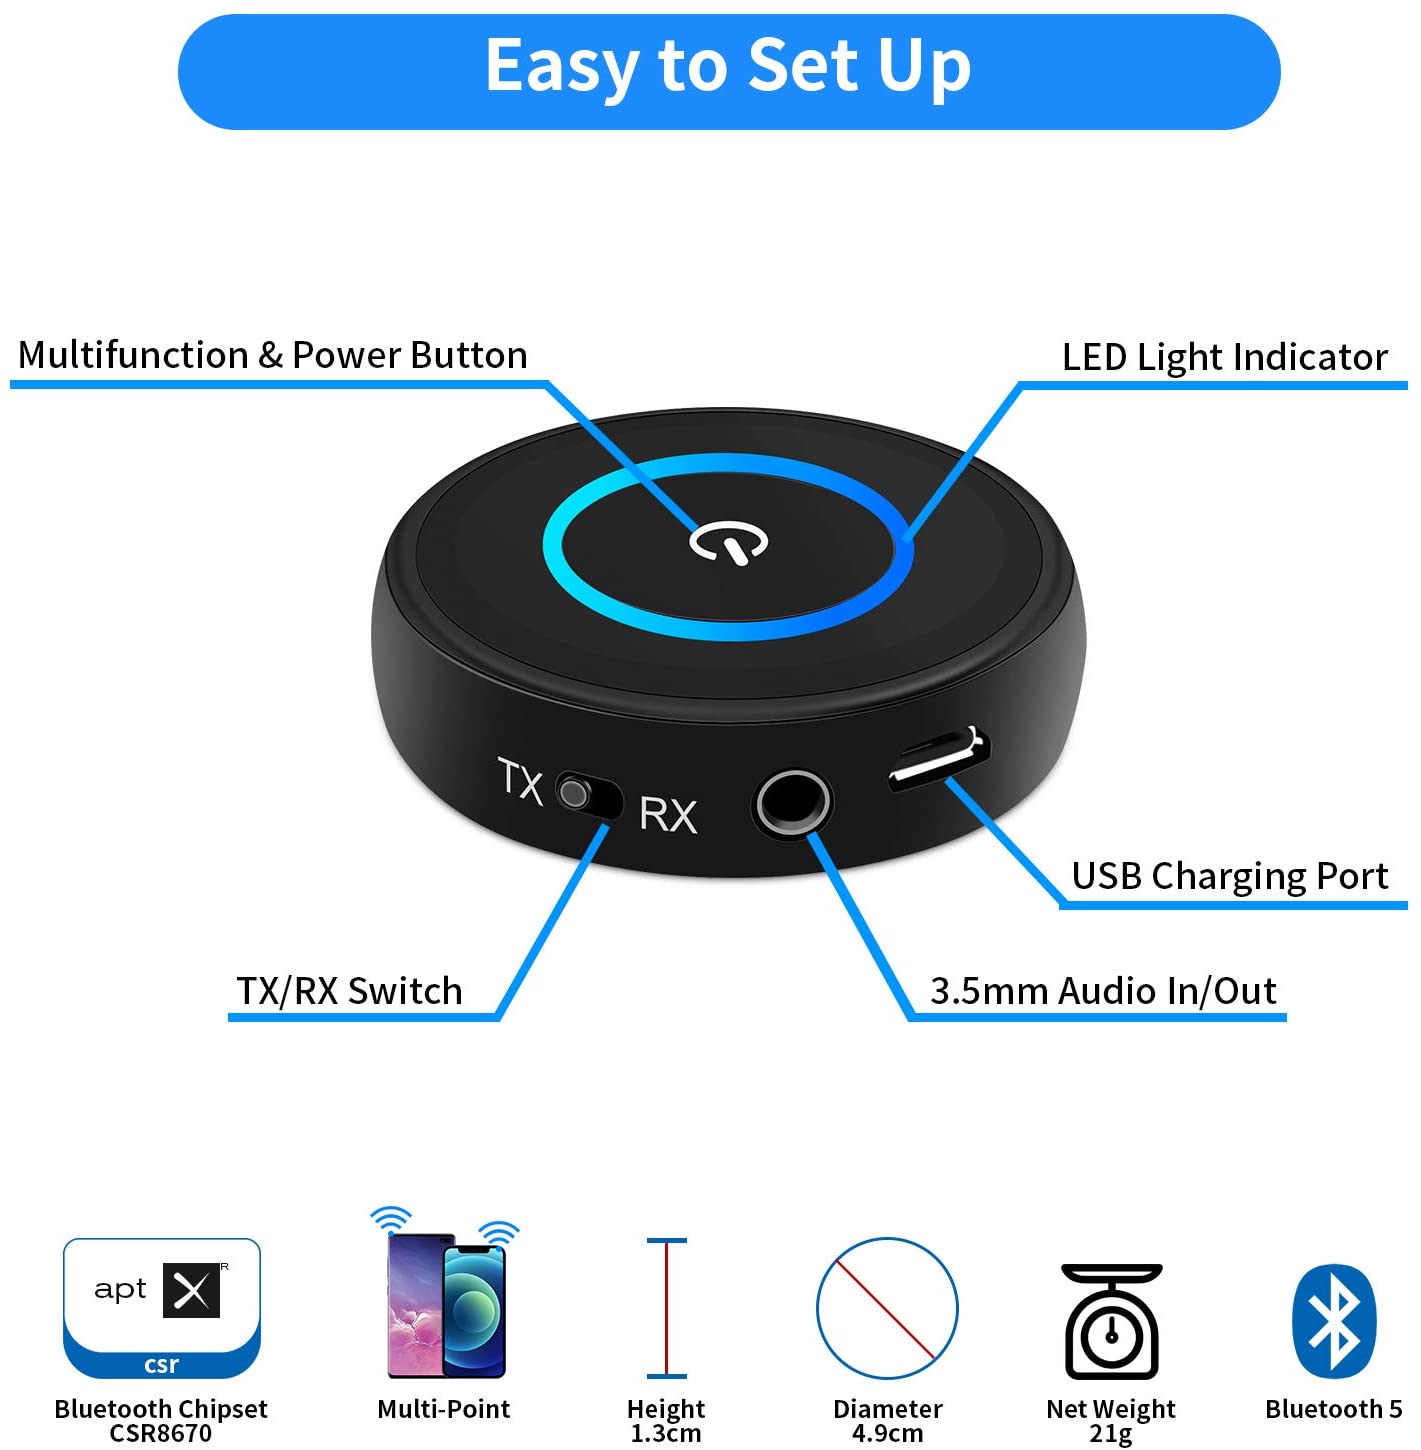 Giveet Bluetooth V4.1 Transmitter and Receiver with aptX Low Latency,  Wireless Bluetooth Audio Streaming Adapter for TV, PS4, XBOX, PC,  Headphones